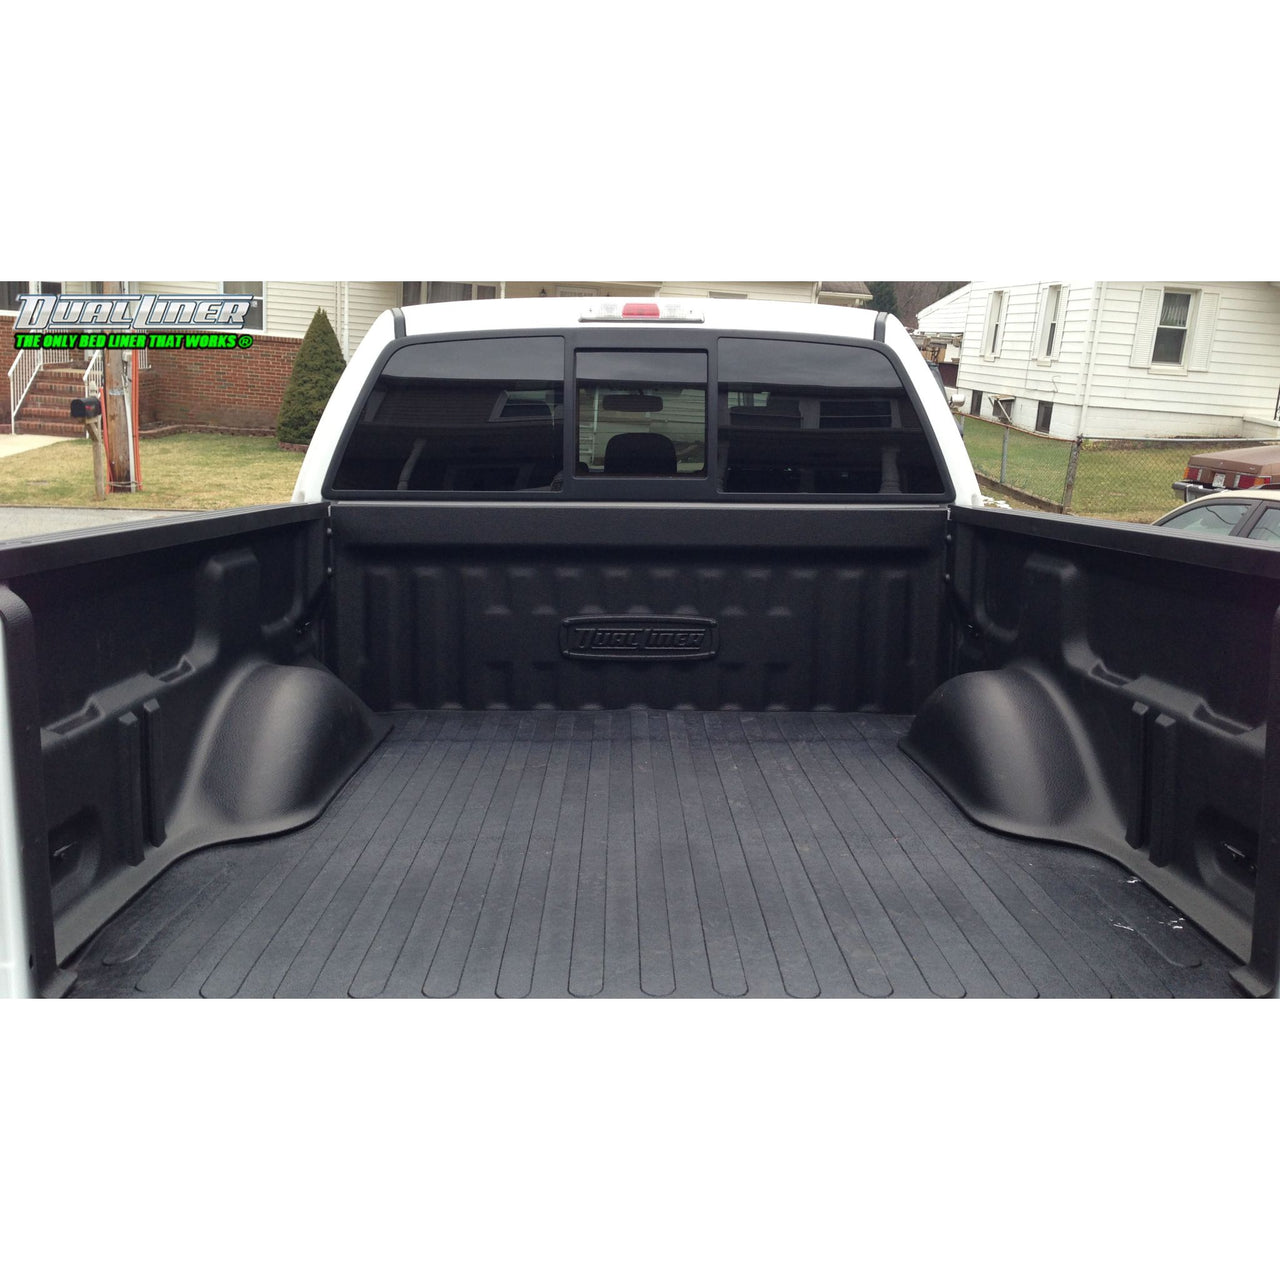 DualLiner 2011 to 2016 F-250 /F-350 - Long 8' Bed